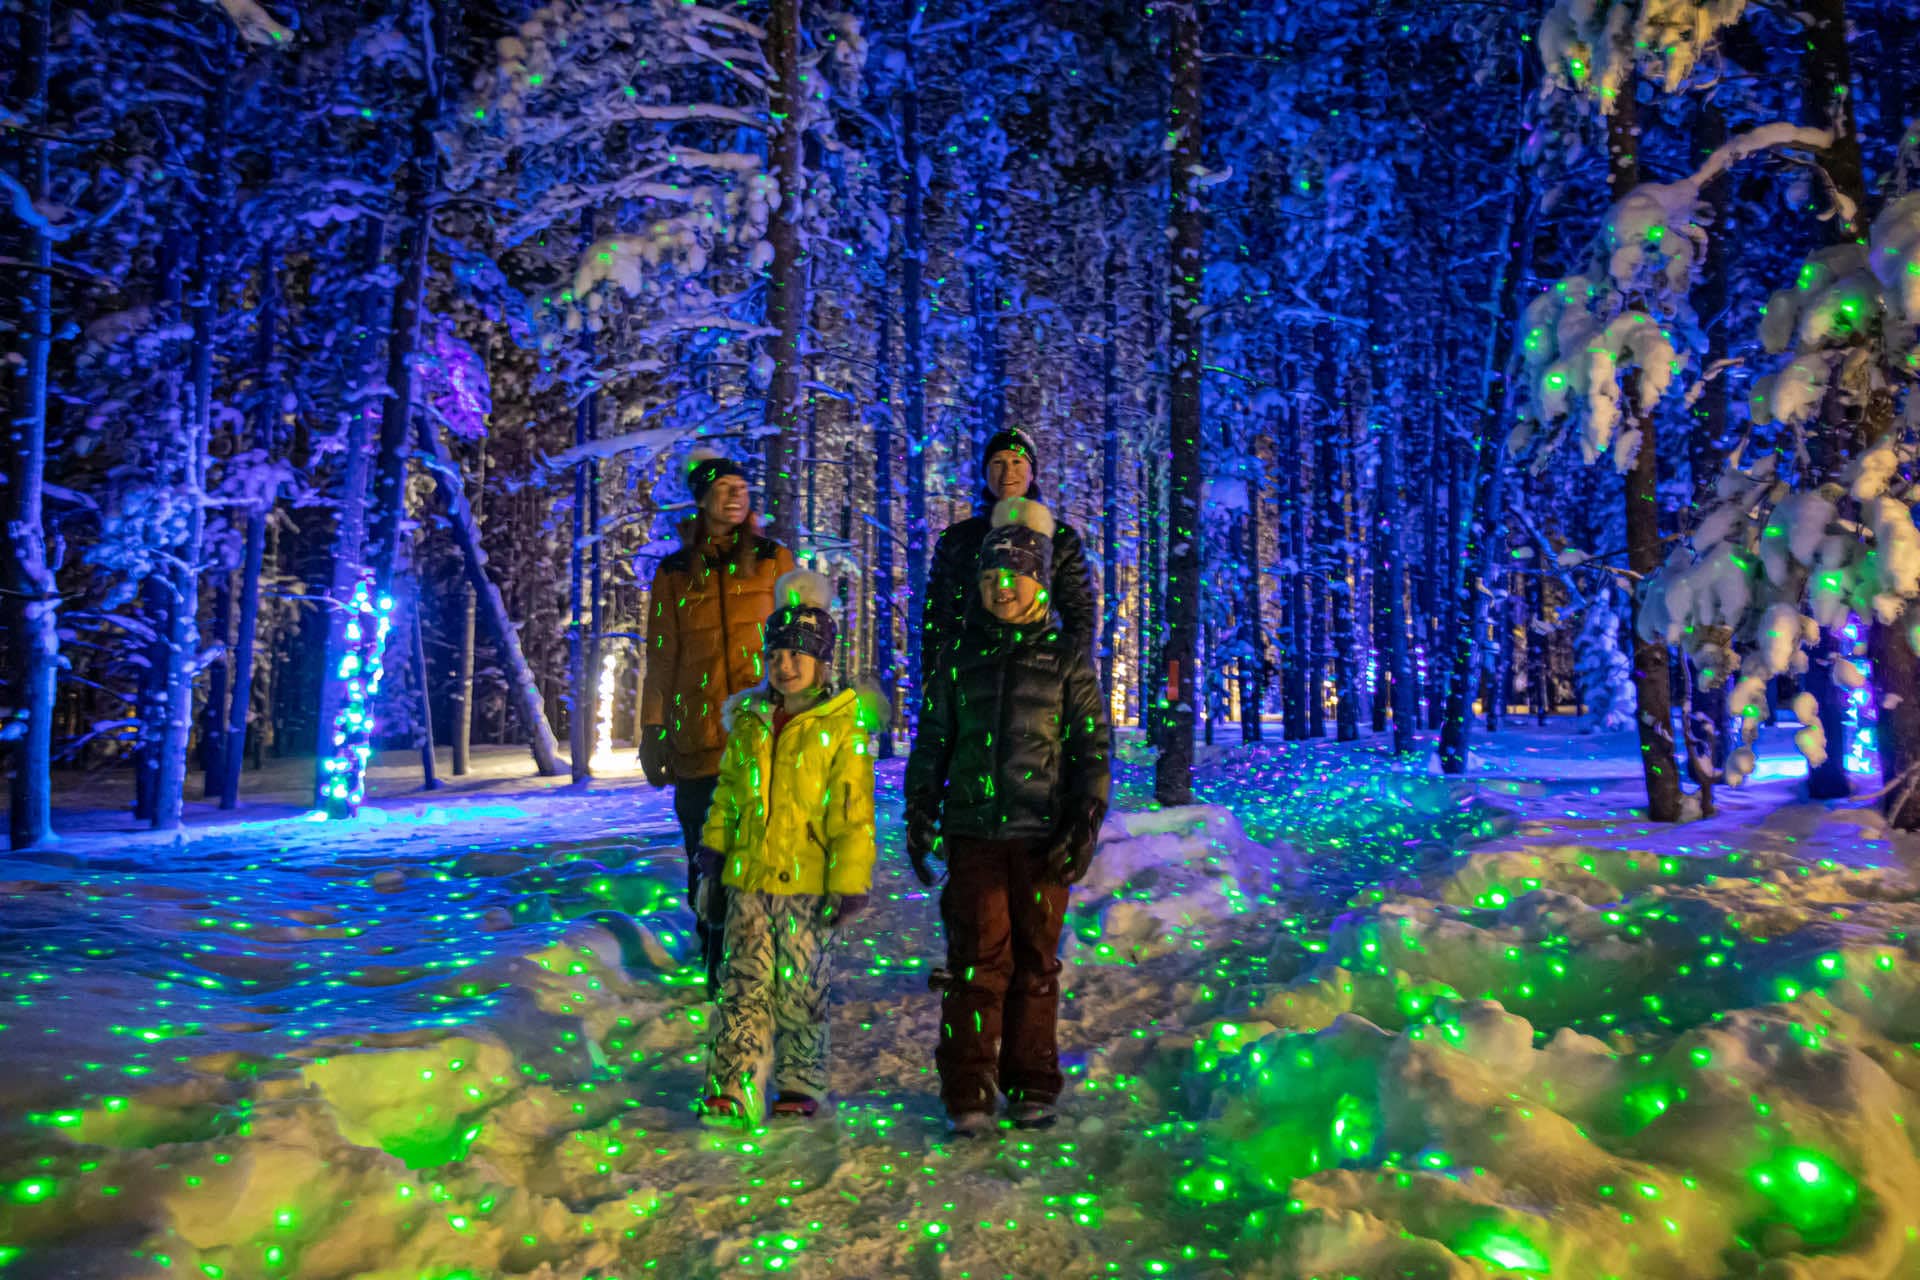 People walking through the Enchanted Forest